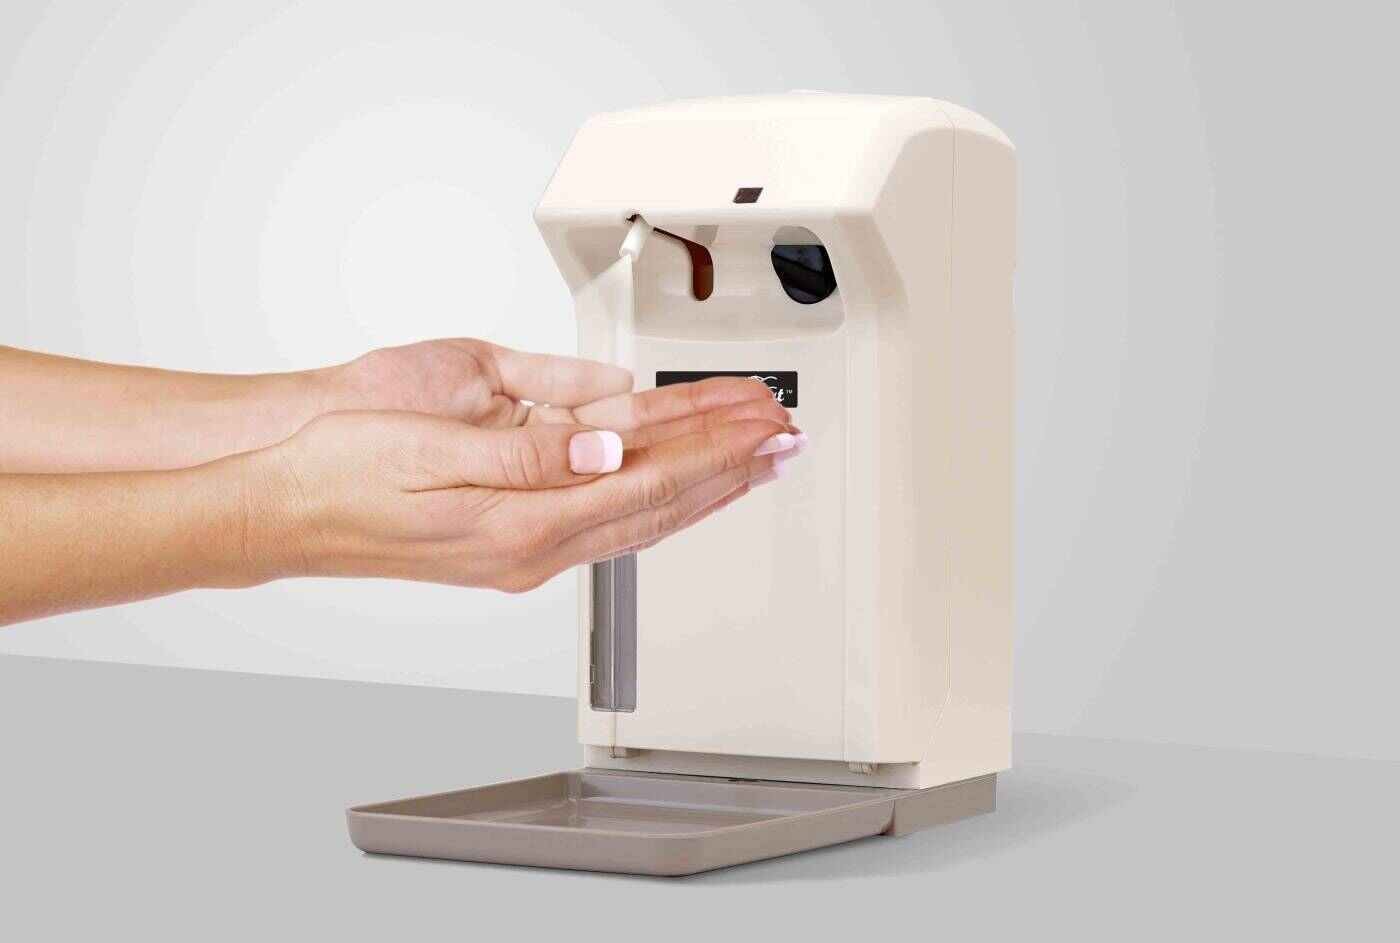 Can I use a soap dispenser for hand sanitizer